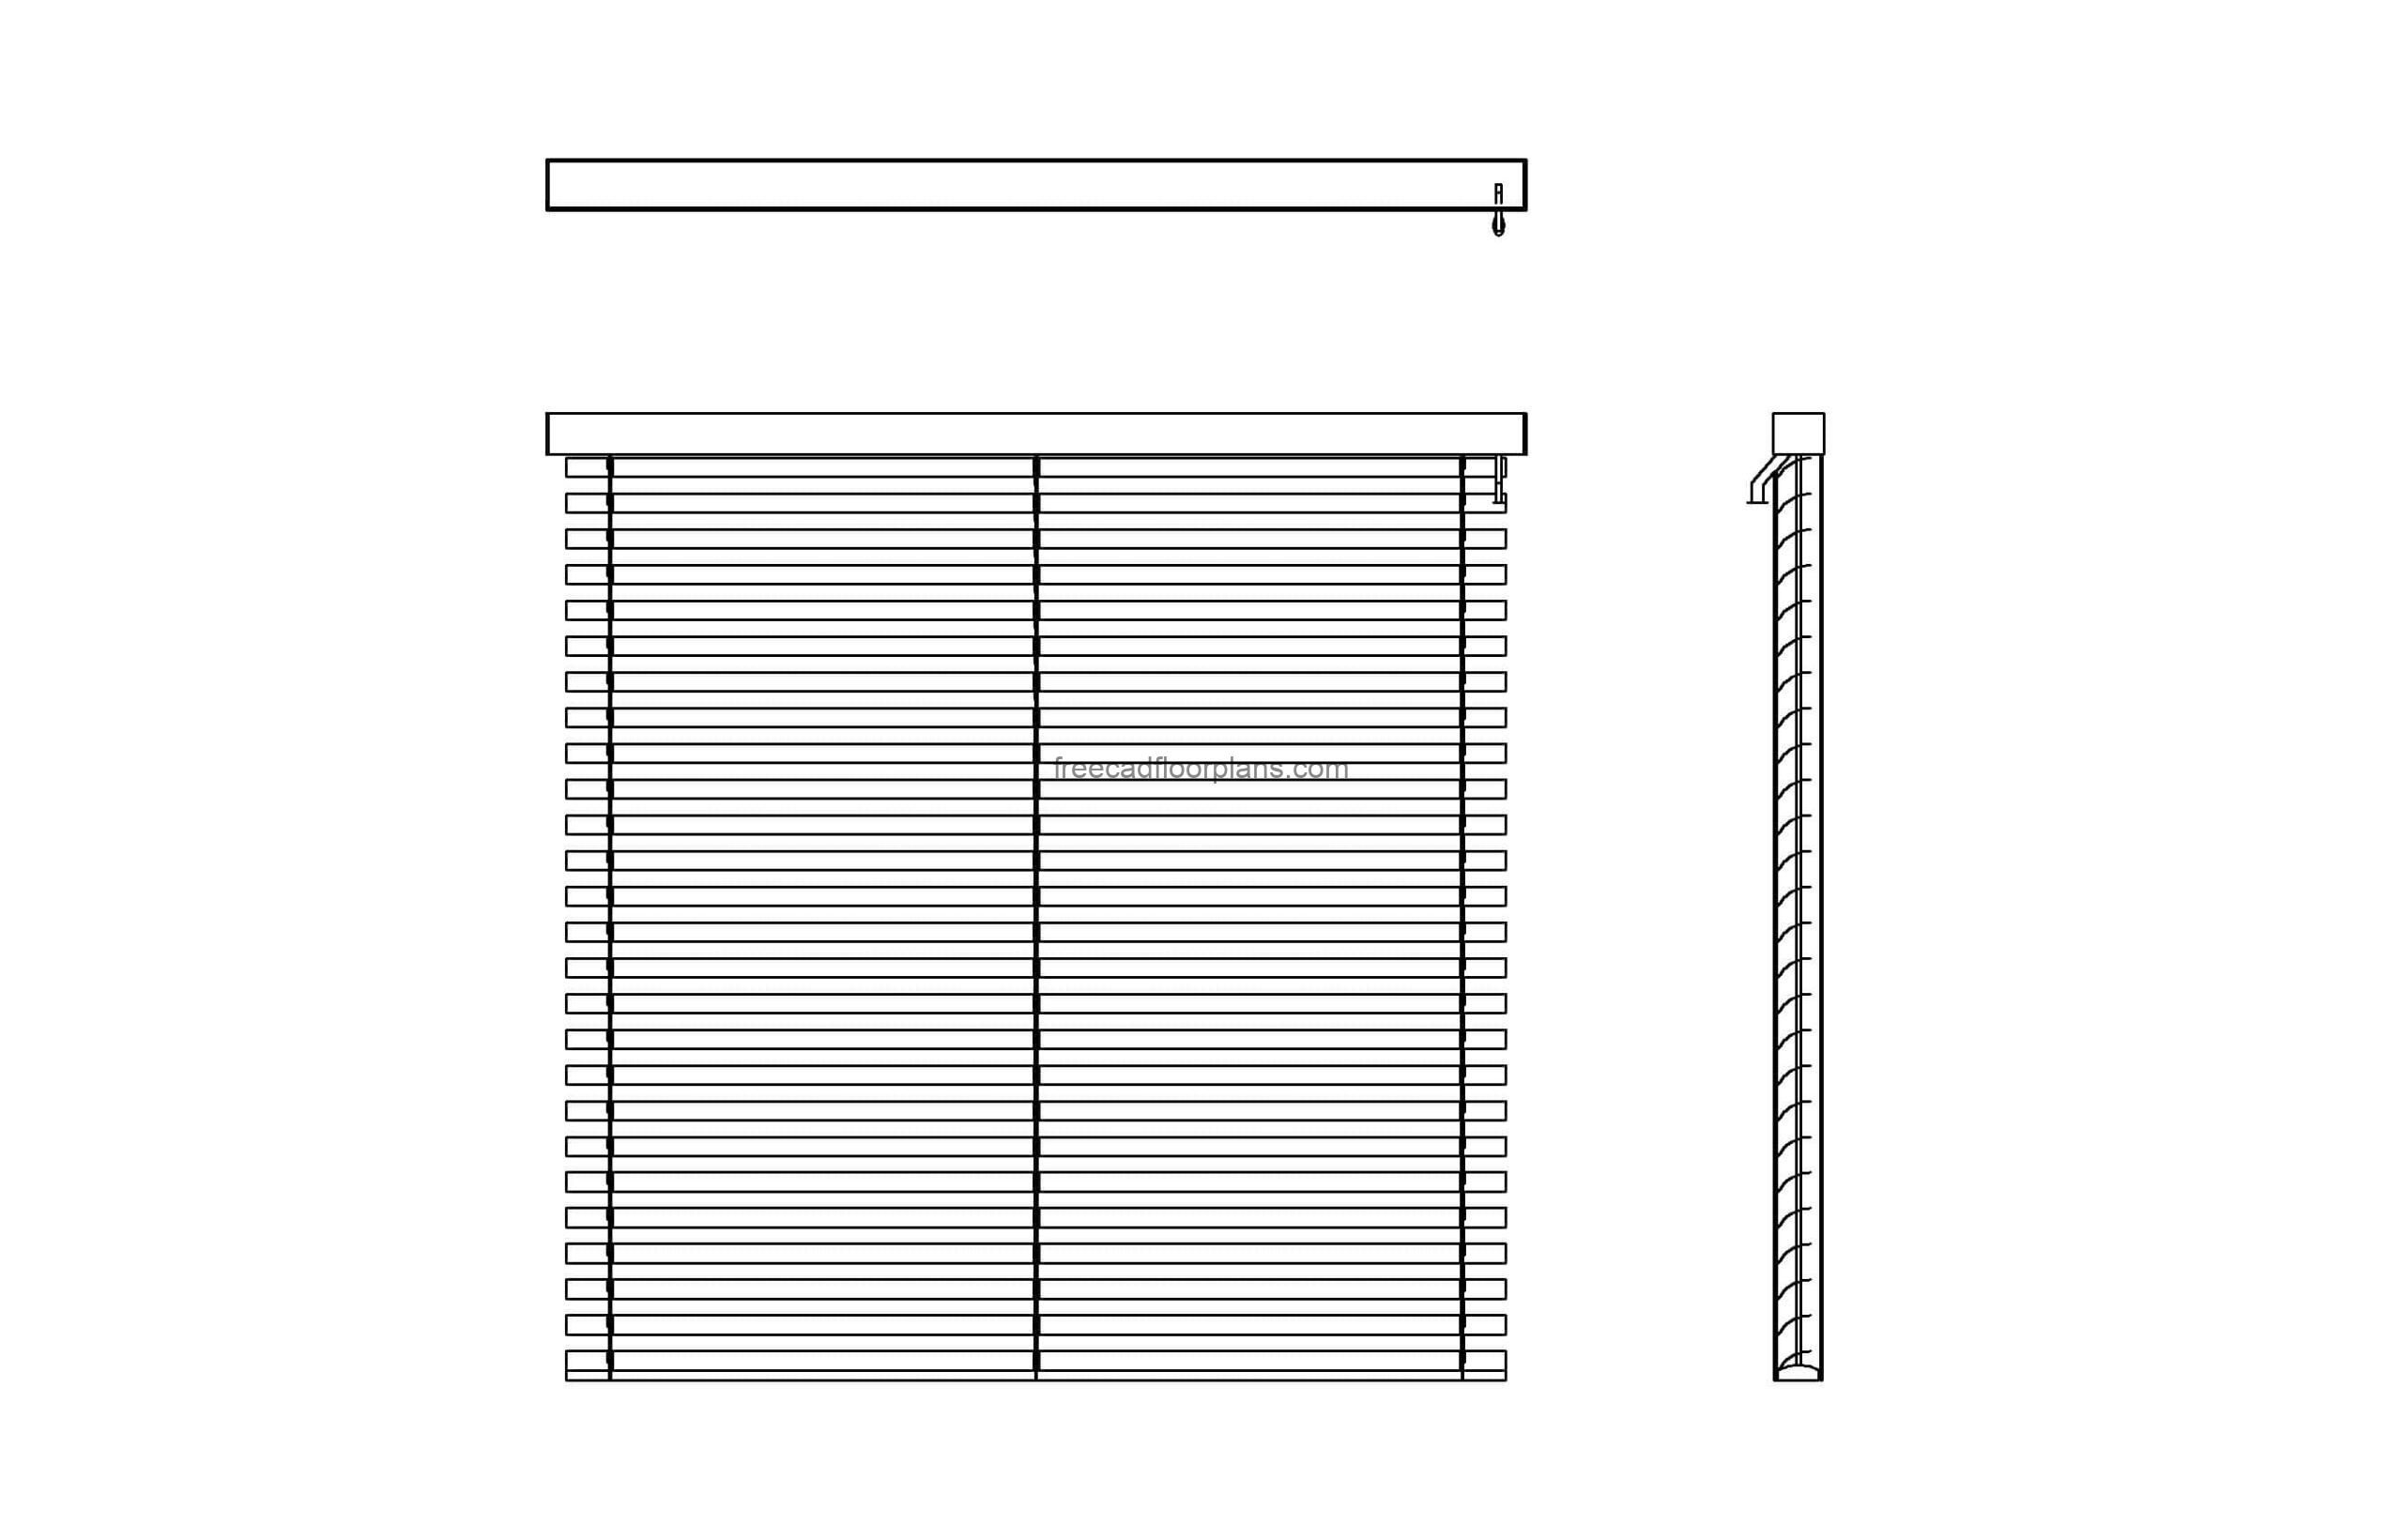 roller blinds autocad drawing all 2d views, plan and elevation, dwg file for free download